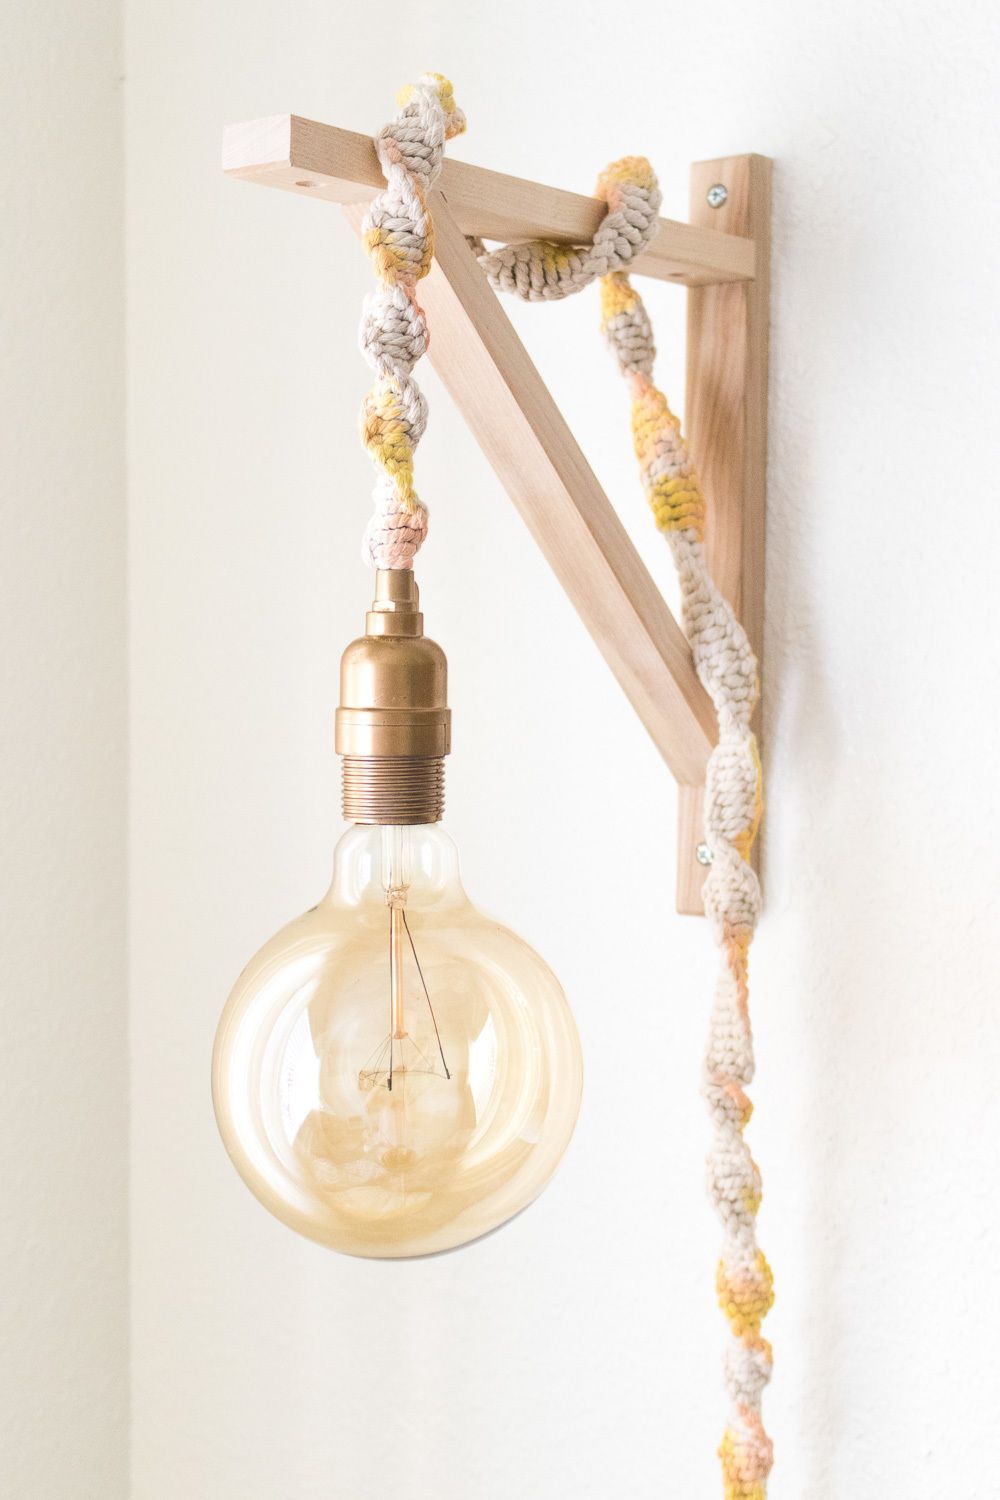 Make a Macrame Wrapped Wall Light in Less than an Hour - Make a Macrame Wrapped Wall Light in Less than an Hour -   15 diy Lamp rope ideas